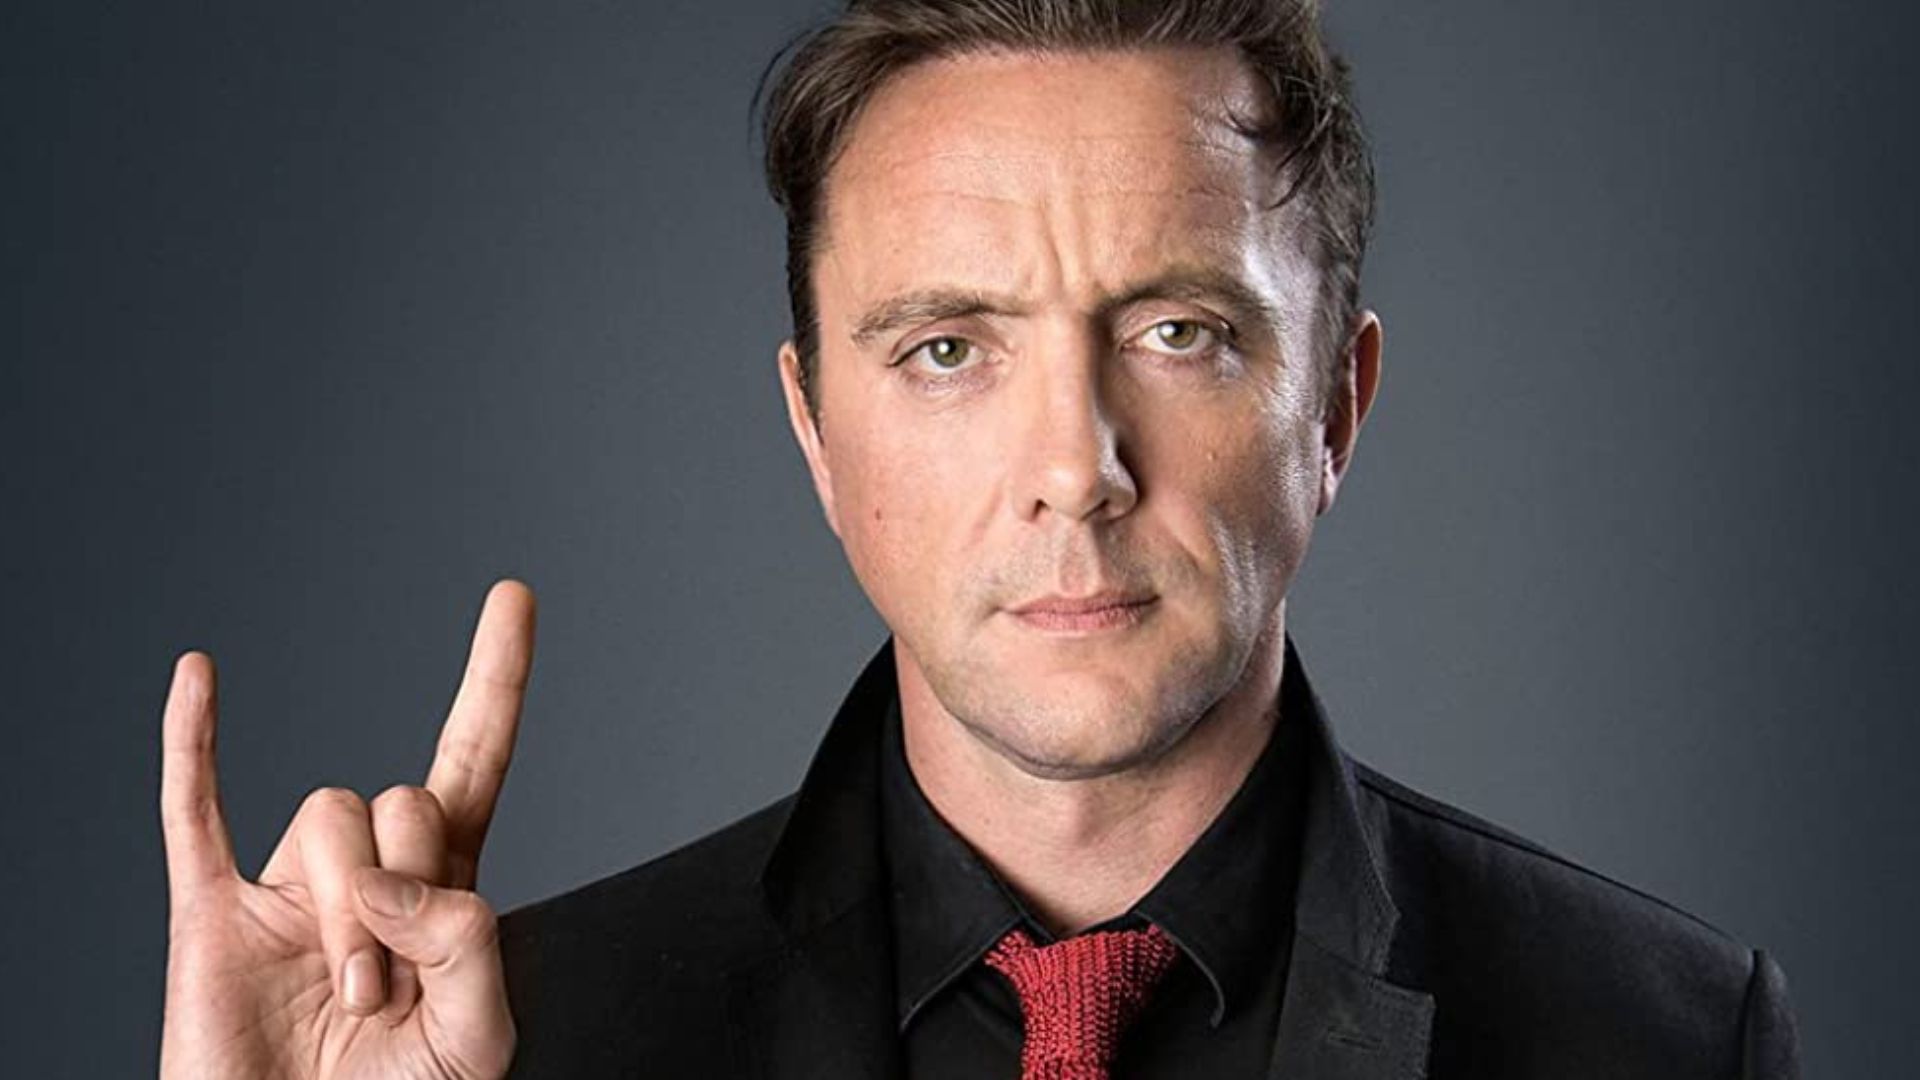 Peter Serafinowicz Doing The Hand Sign